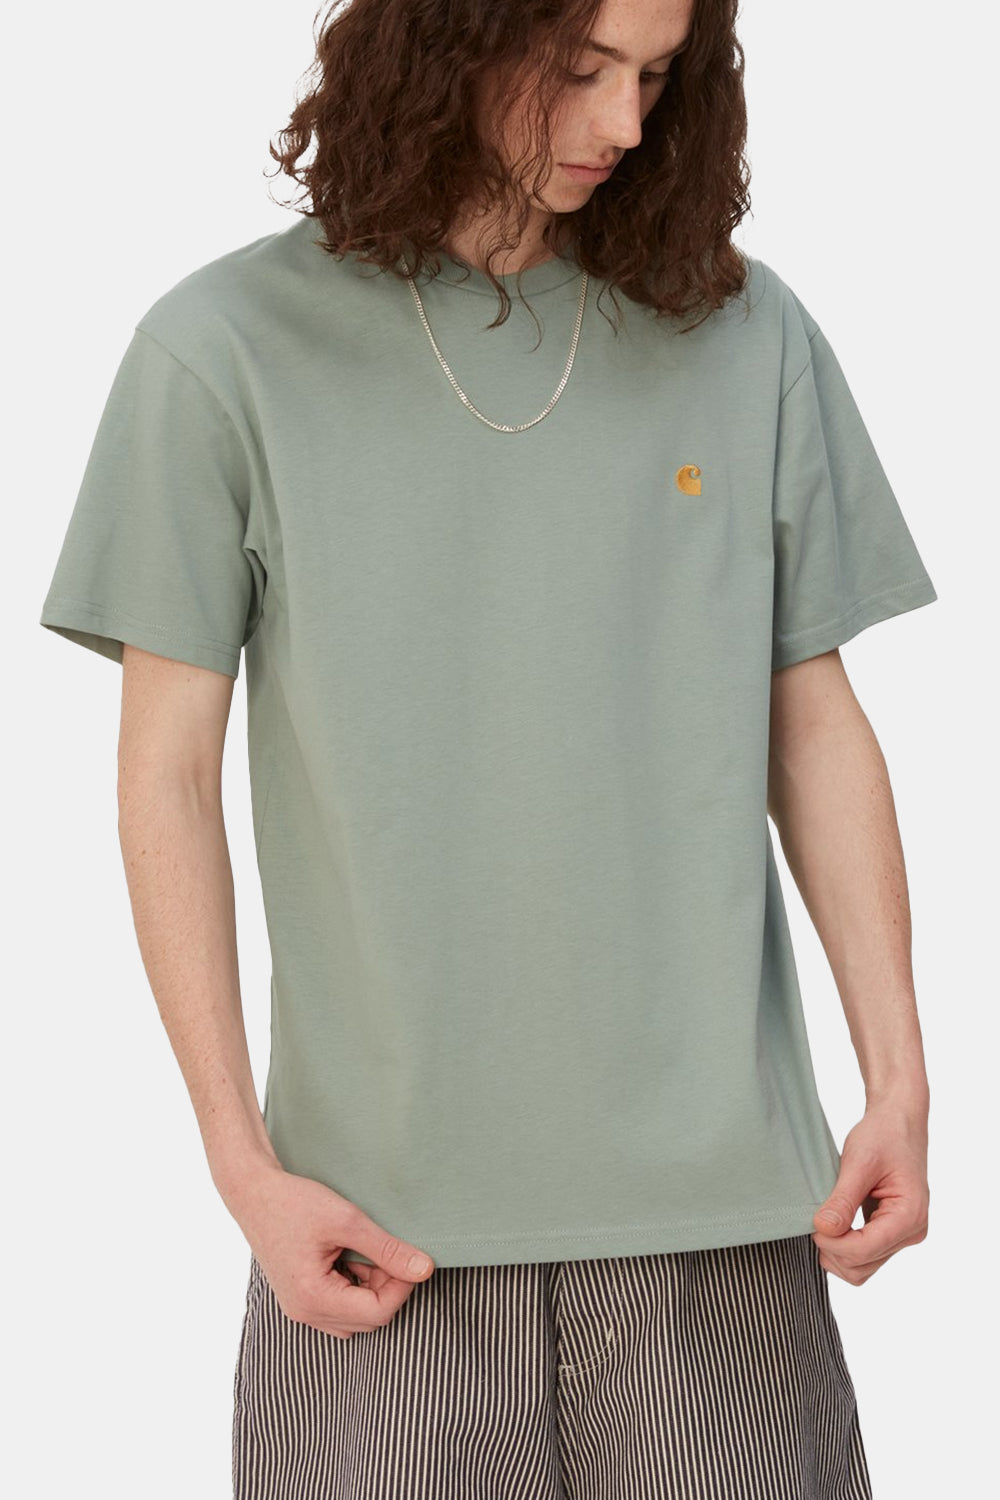 Carhartt WIP S/S Chase T-Shirt (Glassy Teal/Gold)